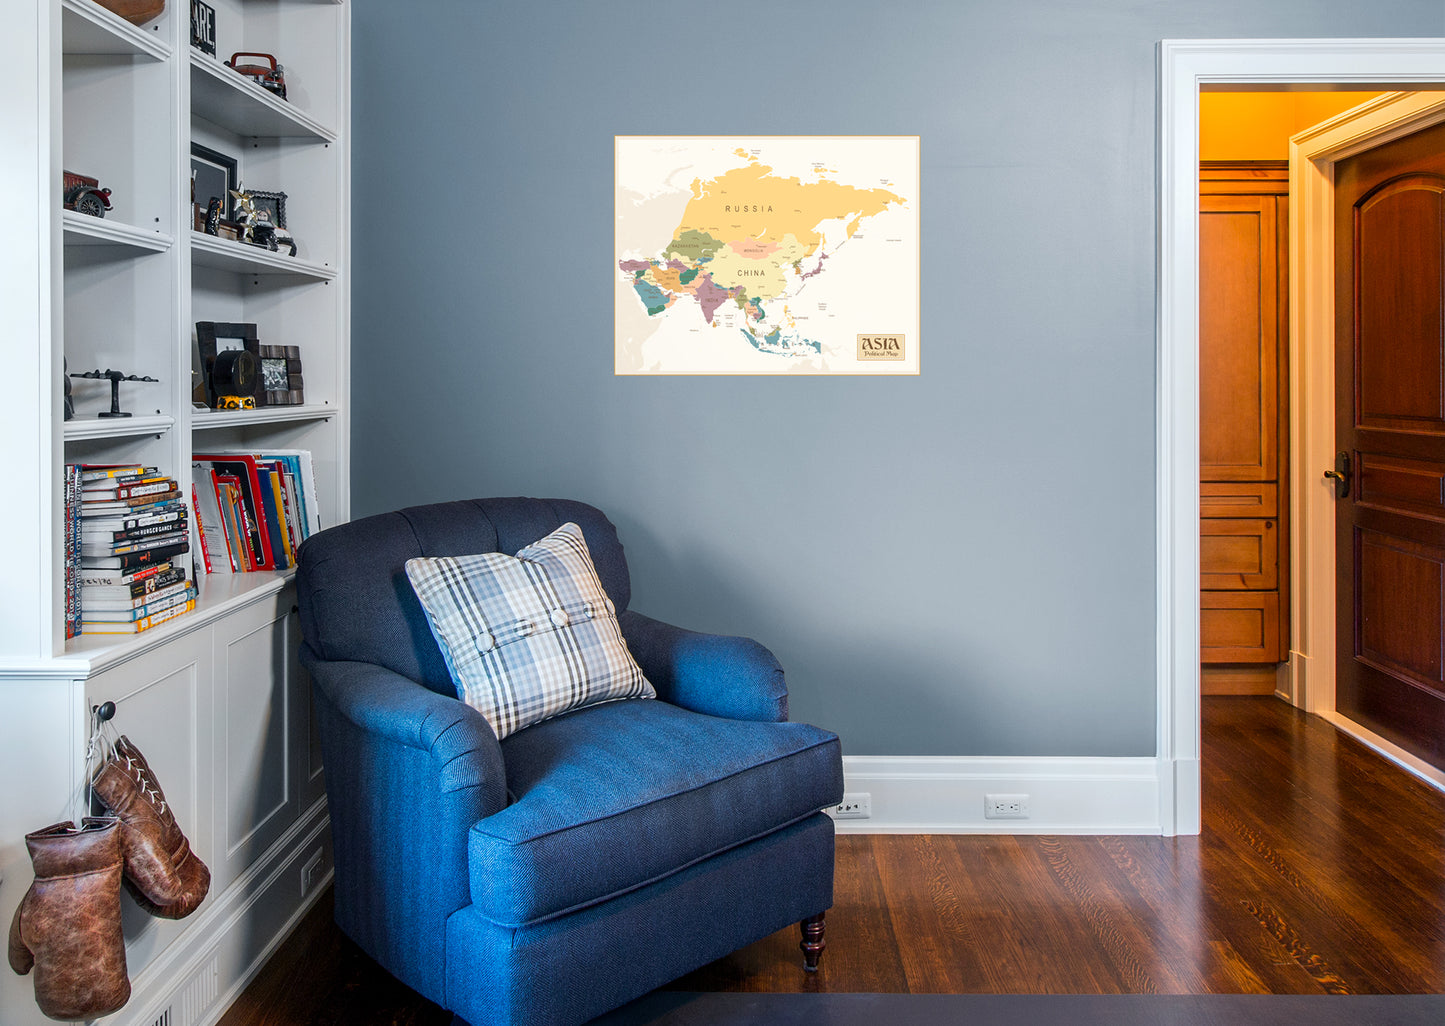 Maps: Asia Political Map Mural        -   Removable Wall   Adhesive Decal